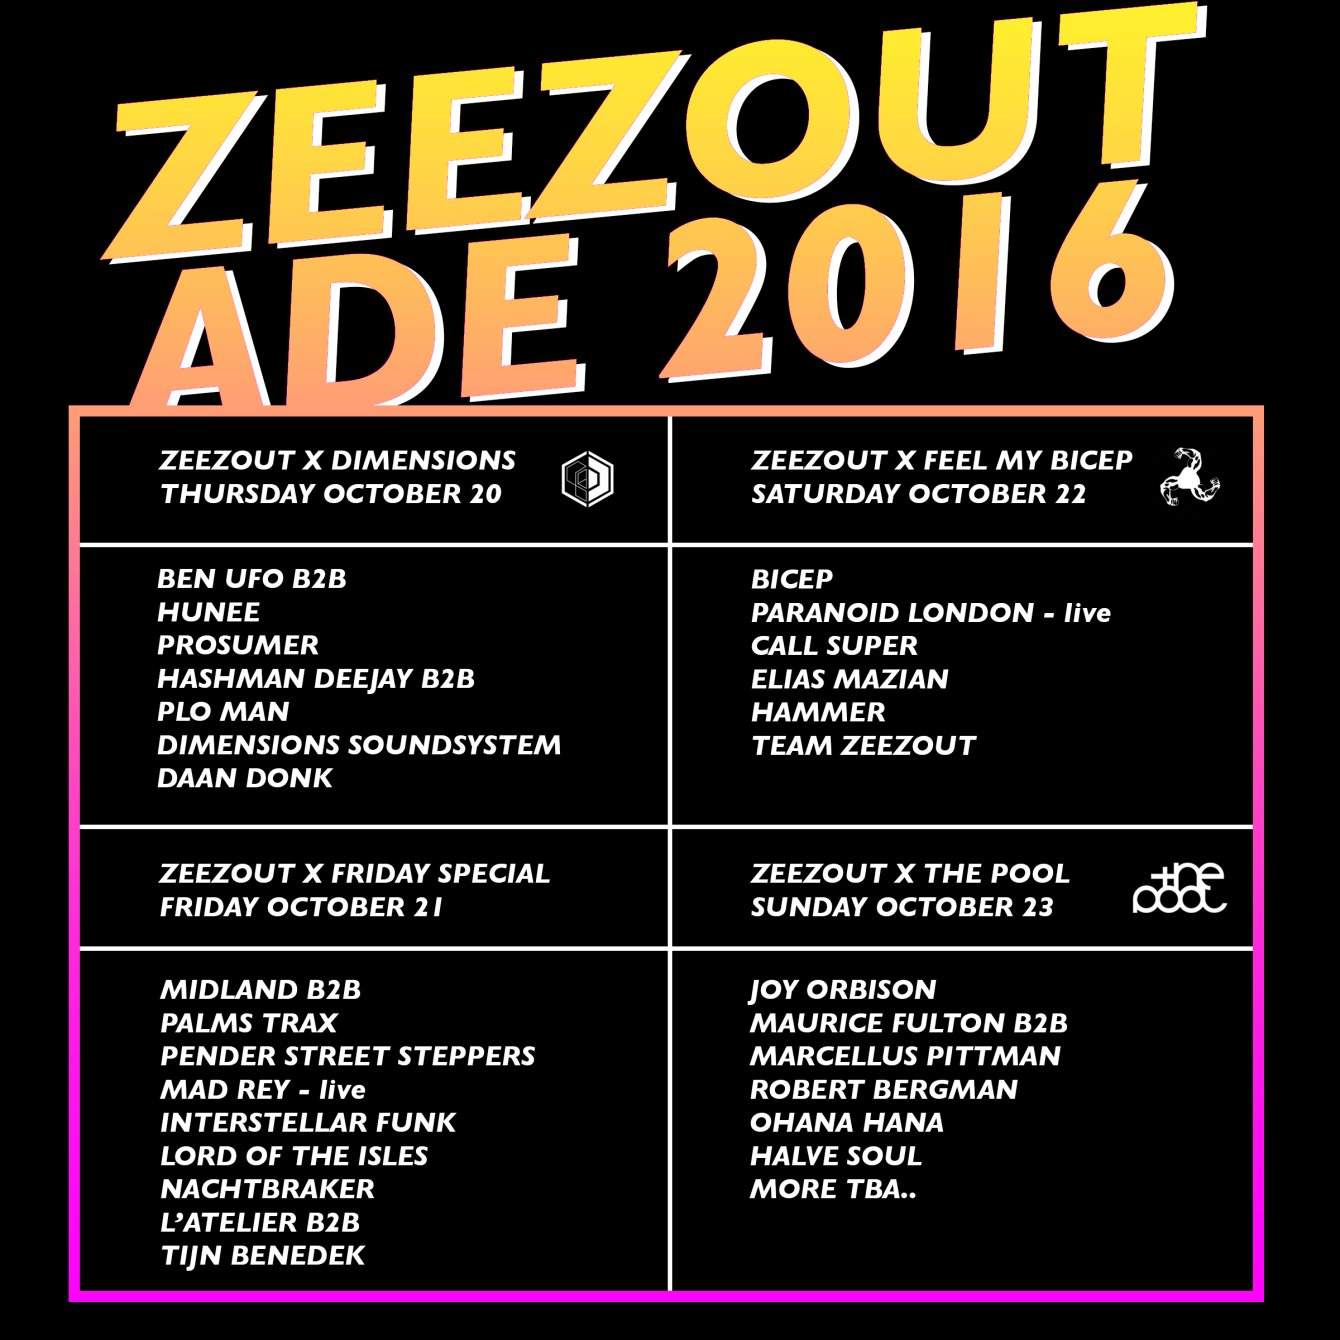 Zeezout ADE 2016: Feel My Bicep with Bicep, Paranoid London, Call Super & More - Página frontal